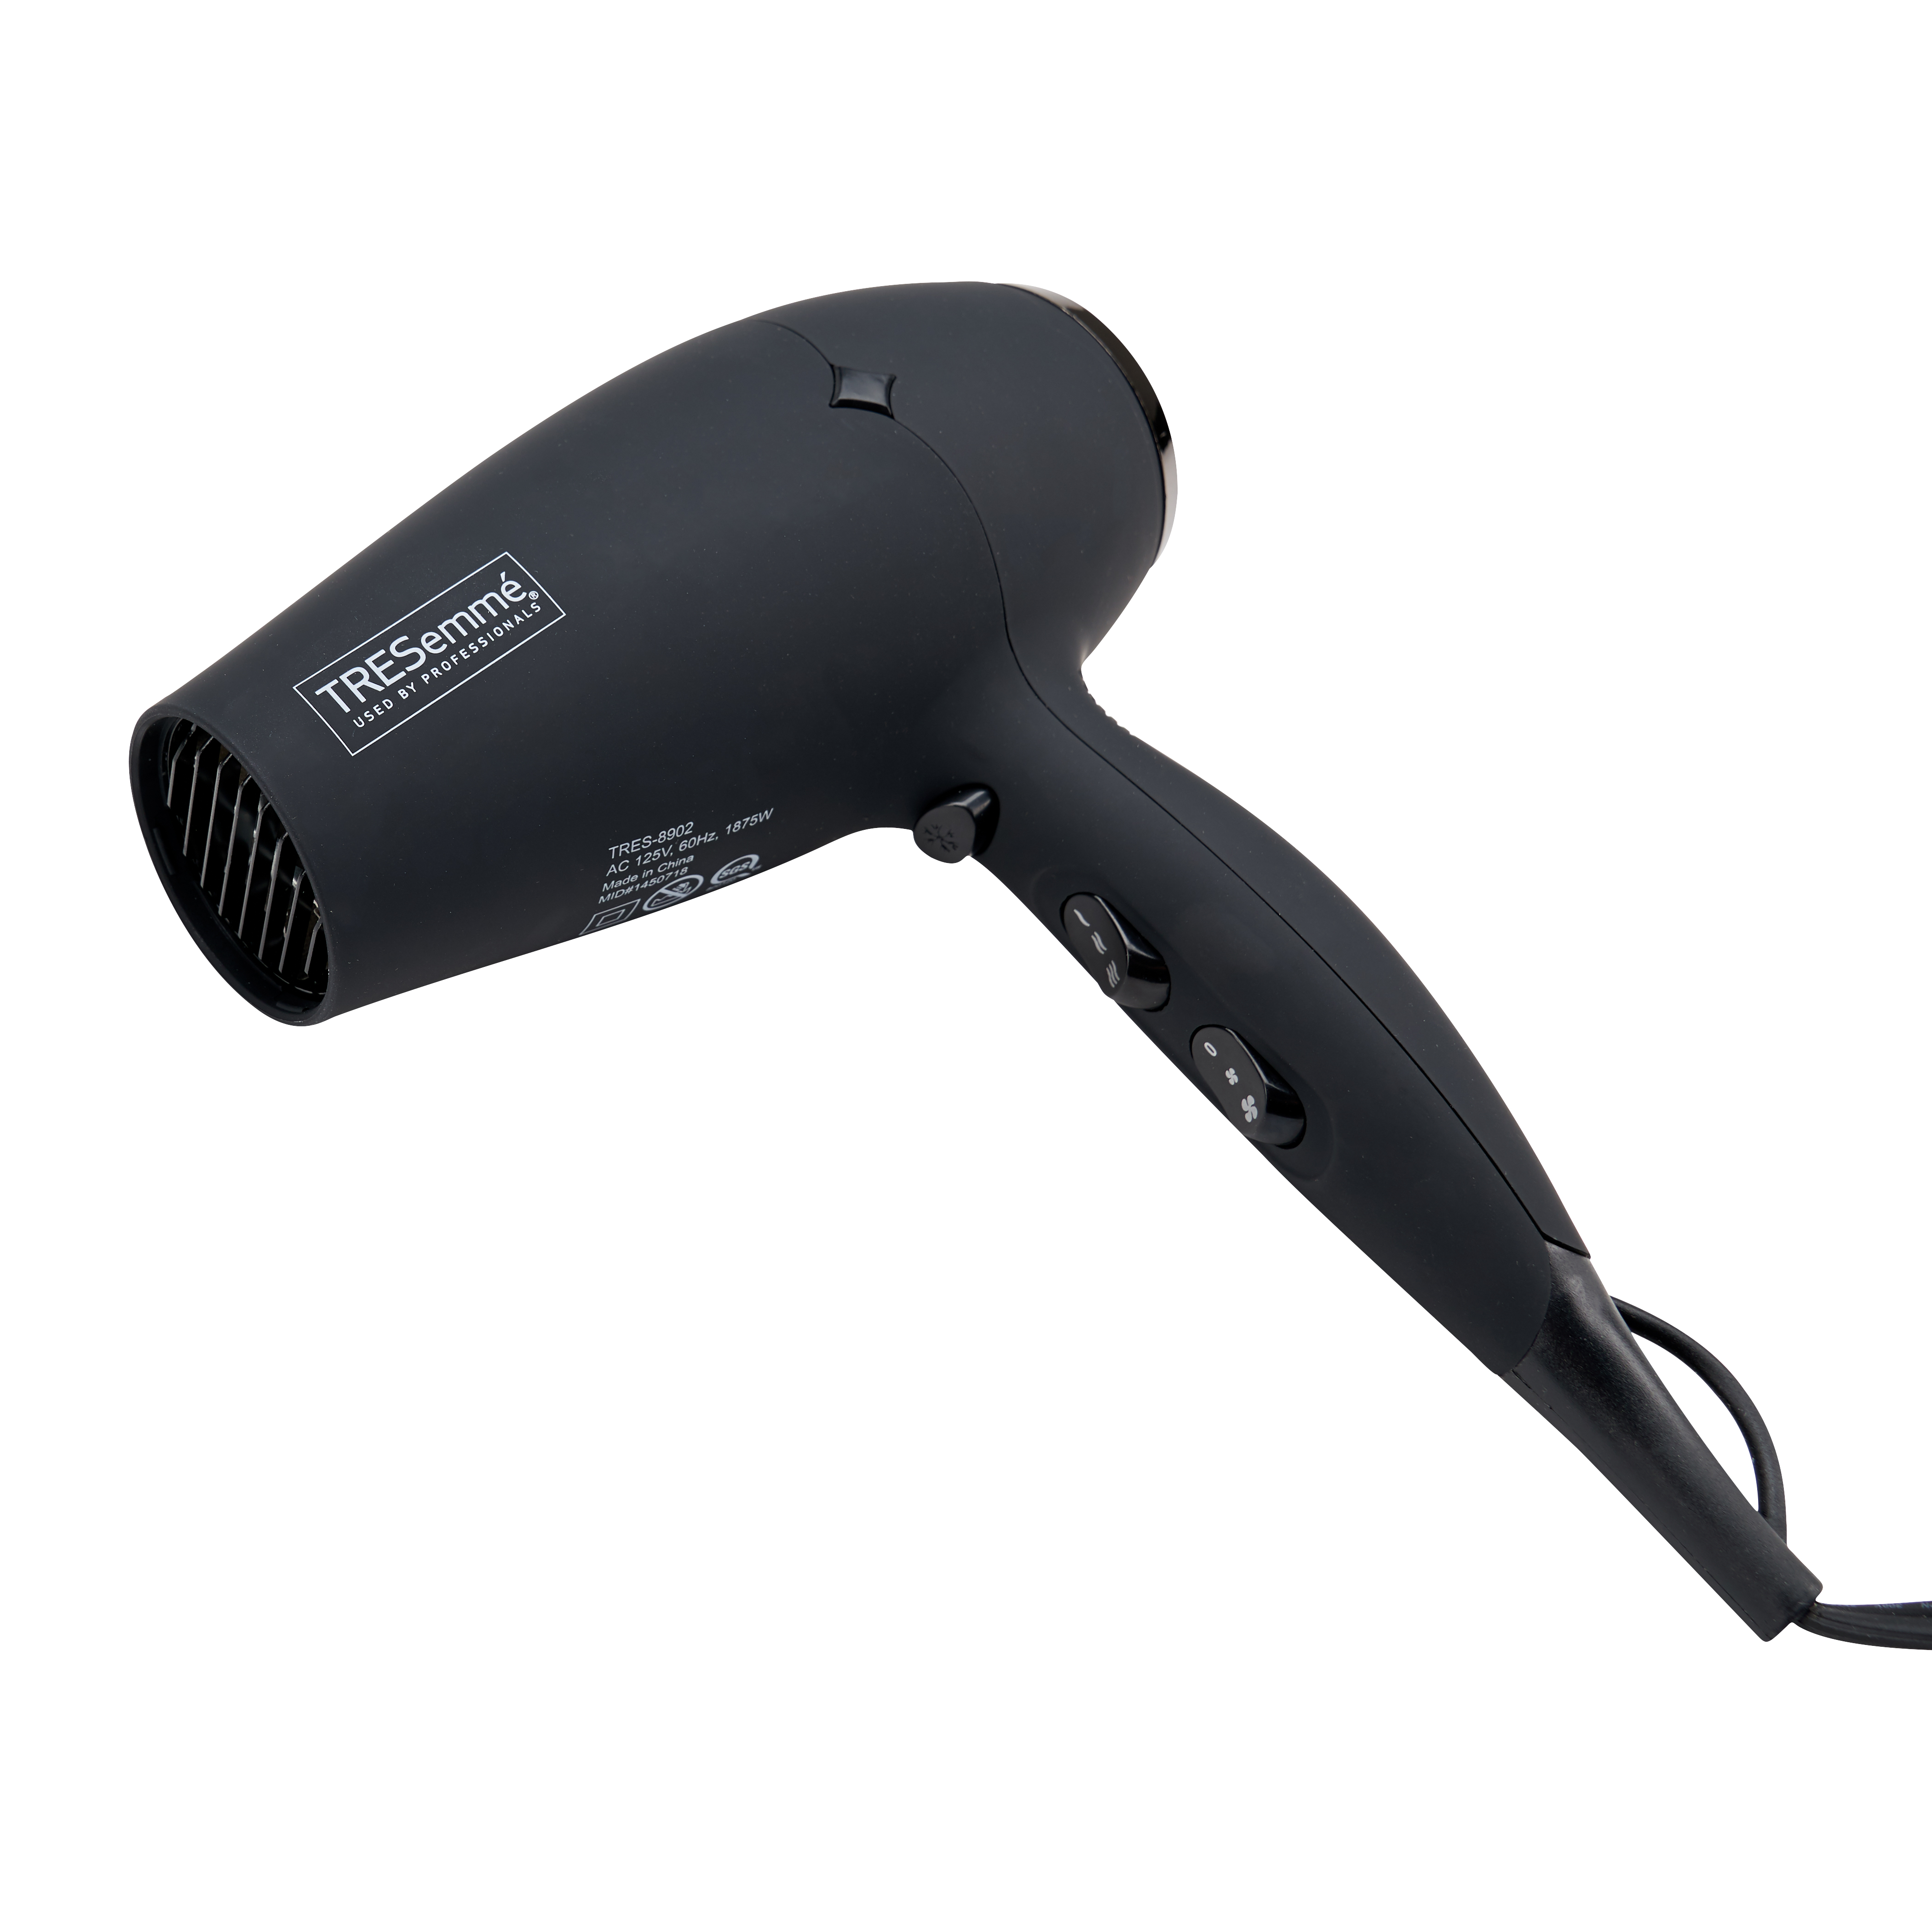 TRESemmé Thermal Creations Rubber Finish Travel Size Professional Tourmaline Ceramic Hair Dryer, 1875 Watts, Black - image 4 of 10